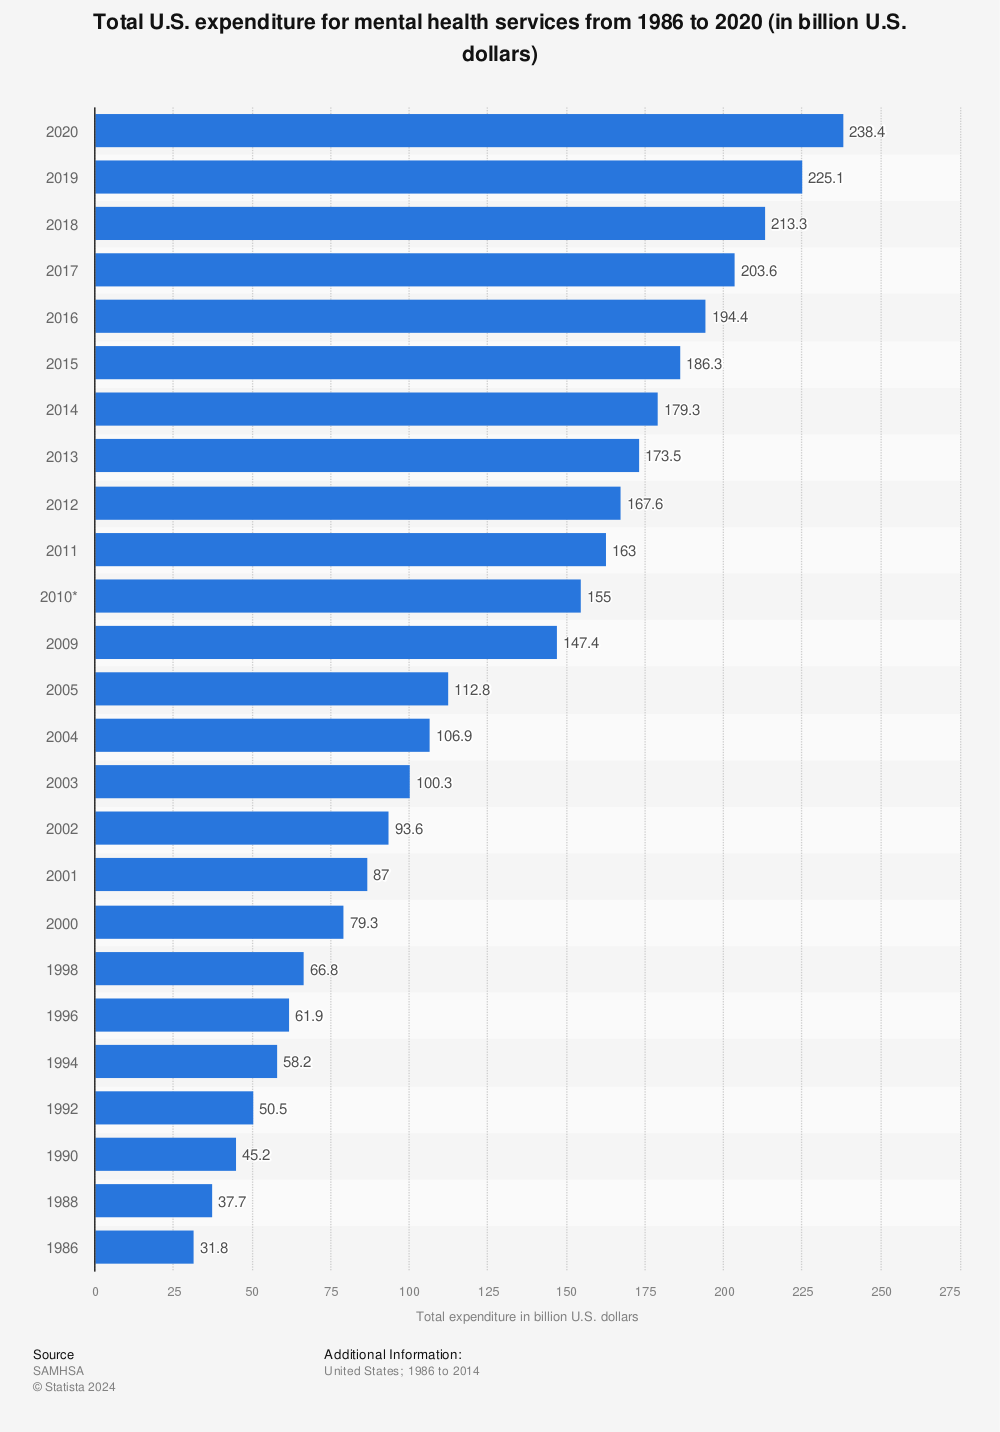 Statistic: Total U.S. expenditure for mental health services from 1986 to 2020 (in billion U.S. dollars) | Statista